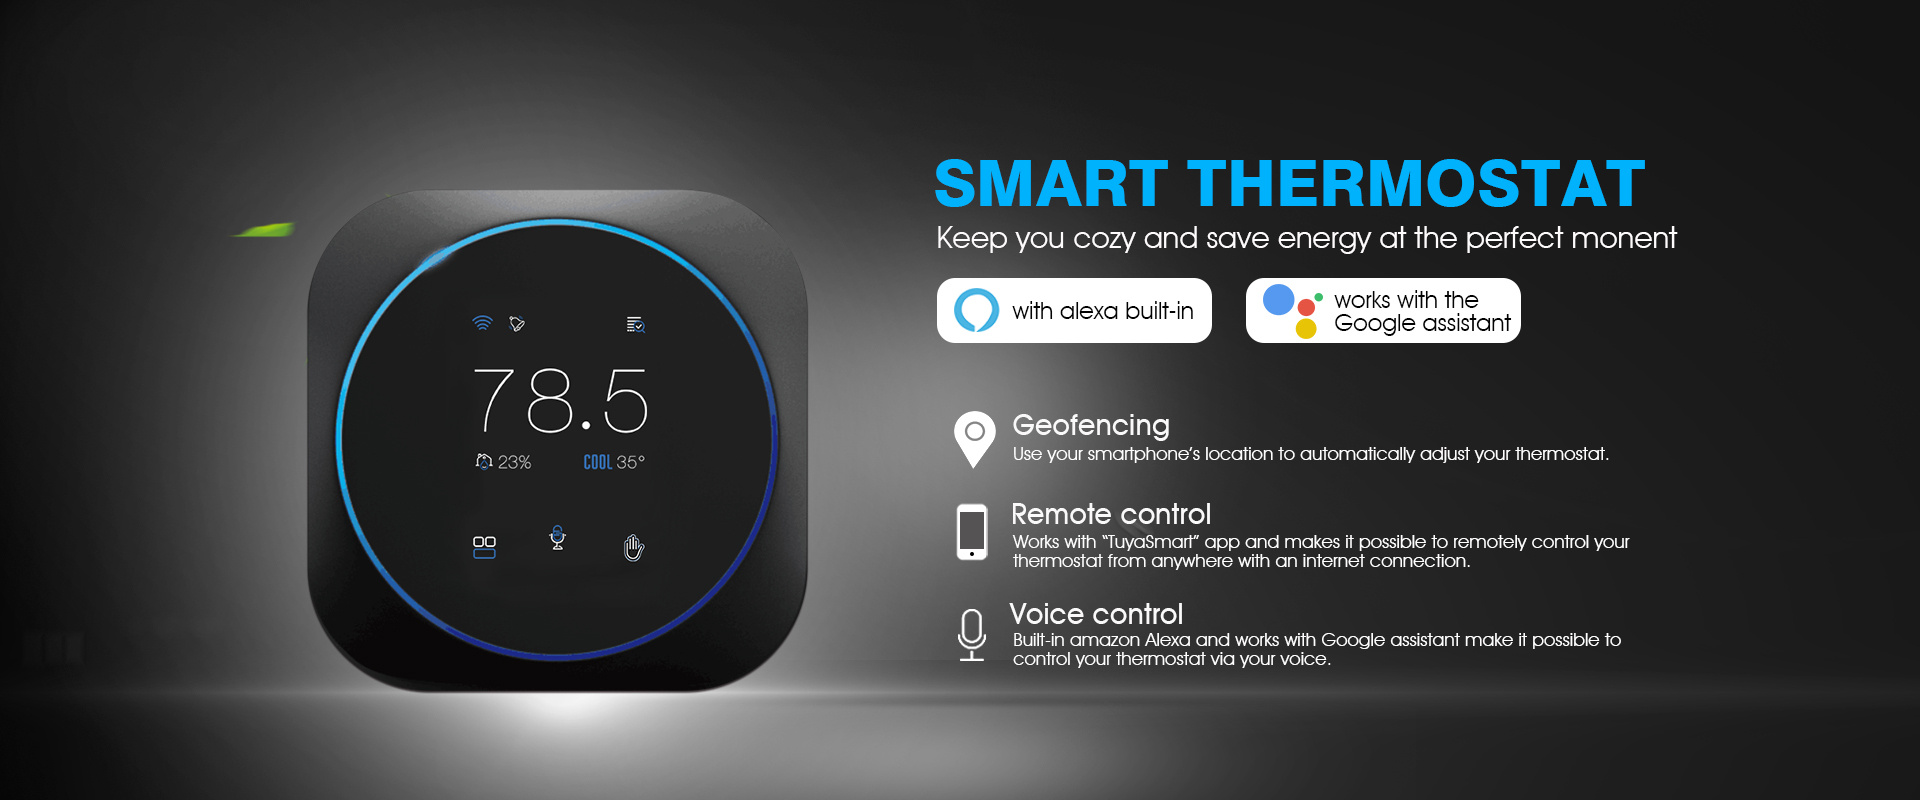 Energy Star Smart Thermostat